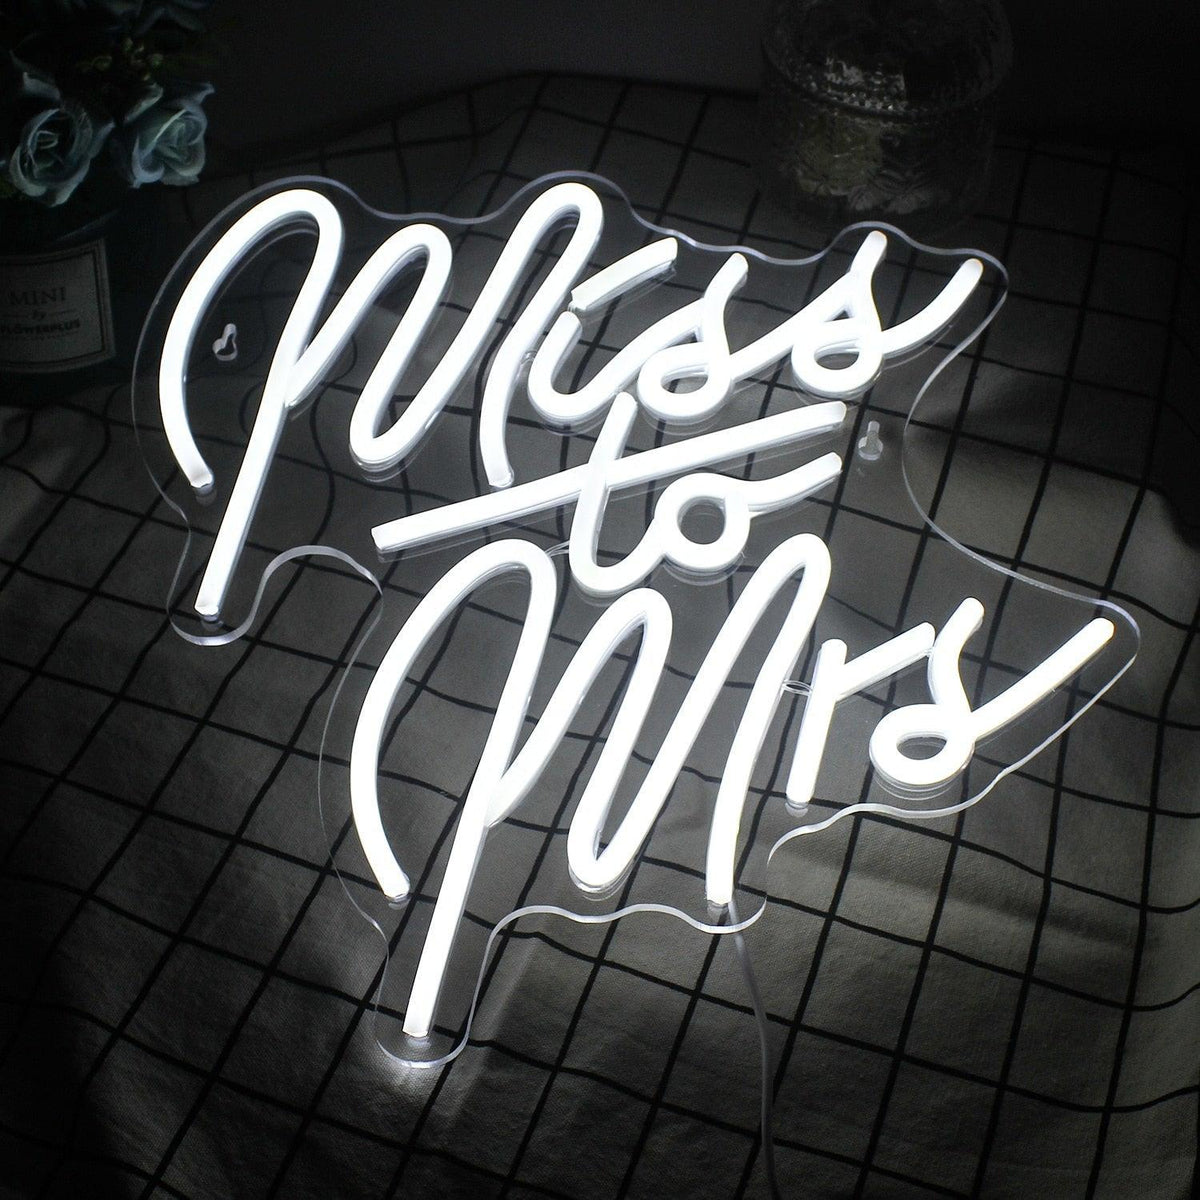 Neon Led Miss To Mrs - Luxurious Weddings